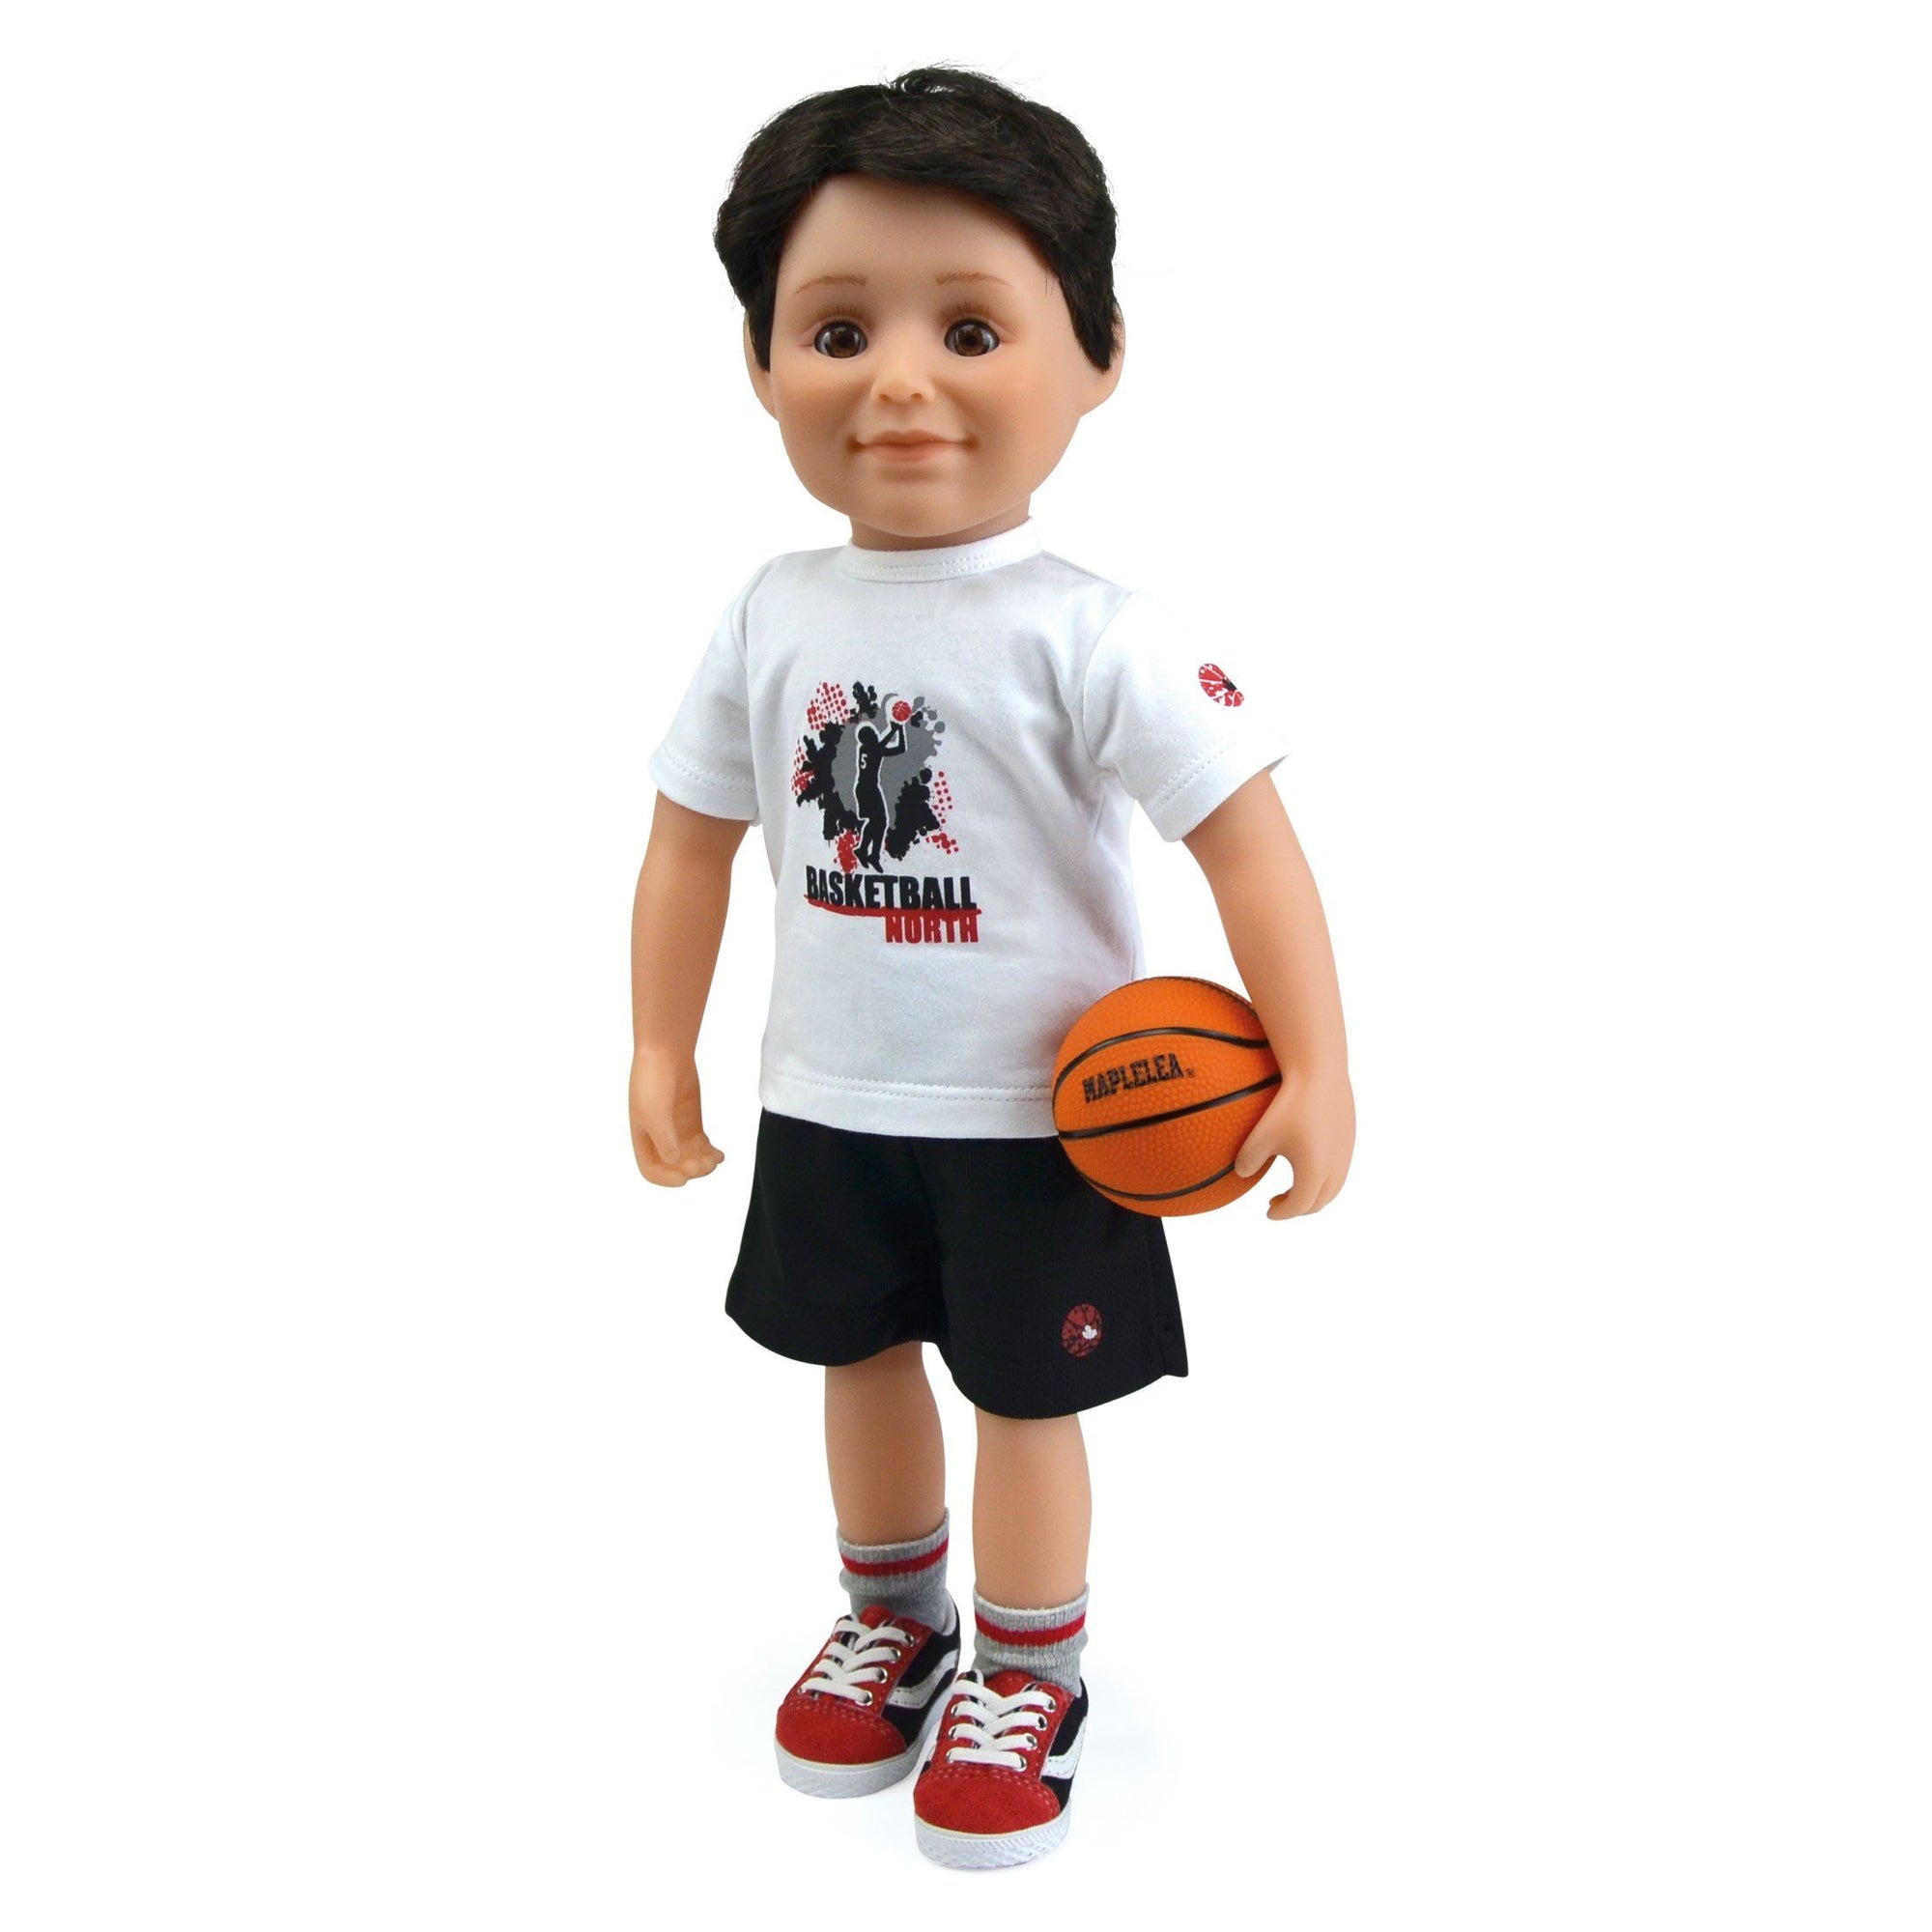 Boy doll wearing a white t-shirt with basketball graphic, black gym shorts, runners and socks